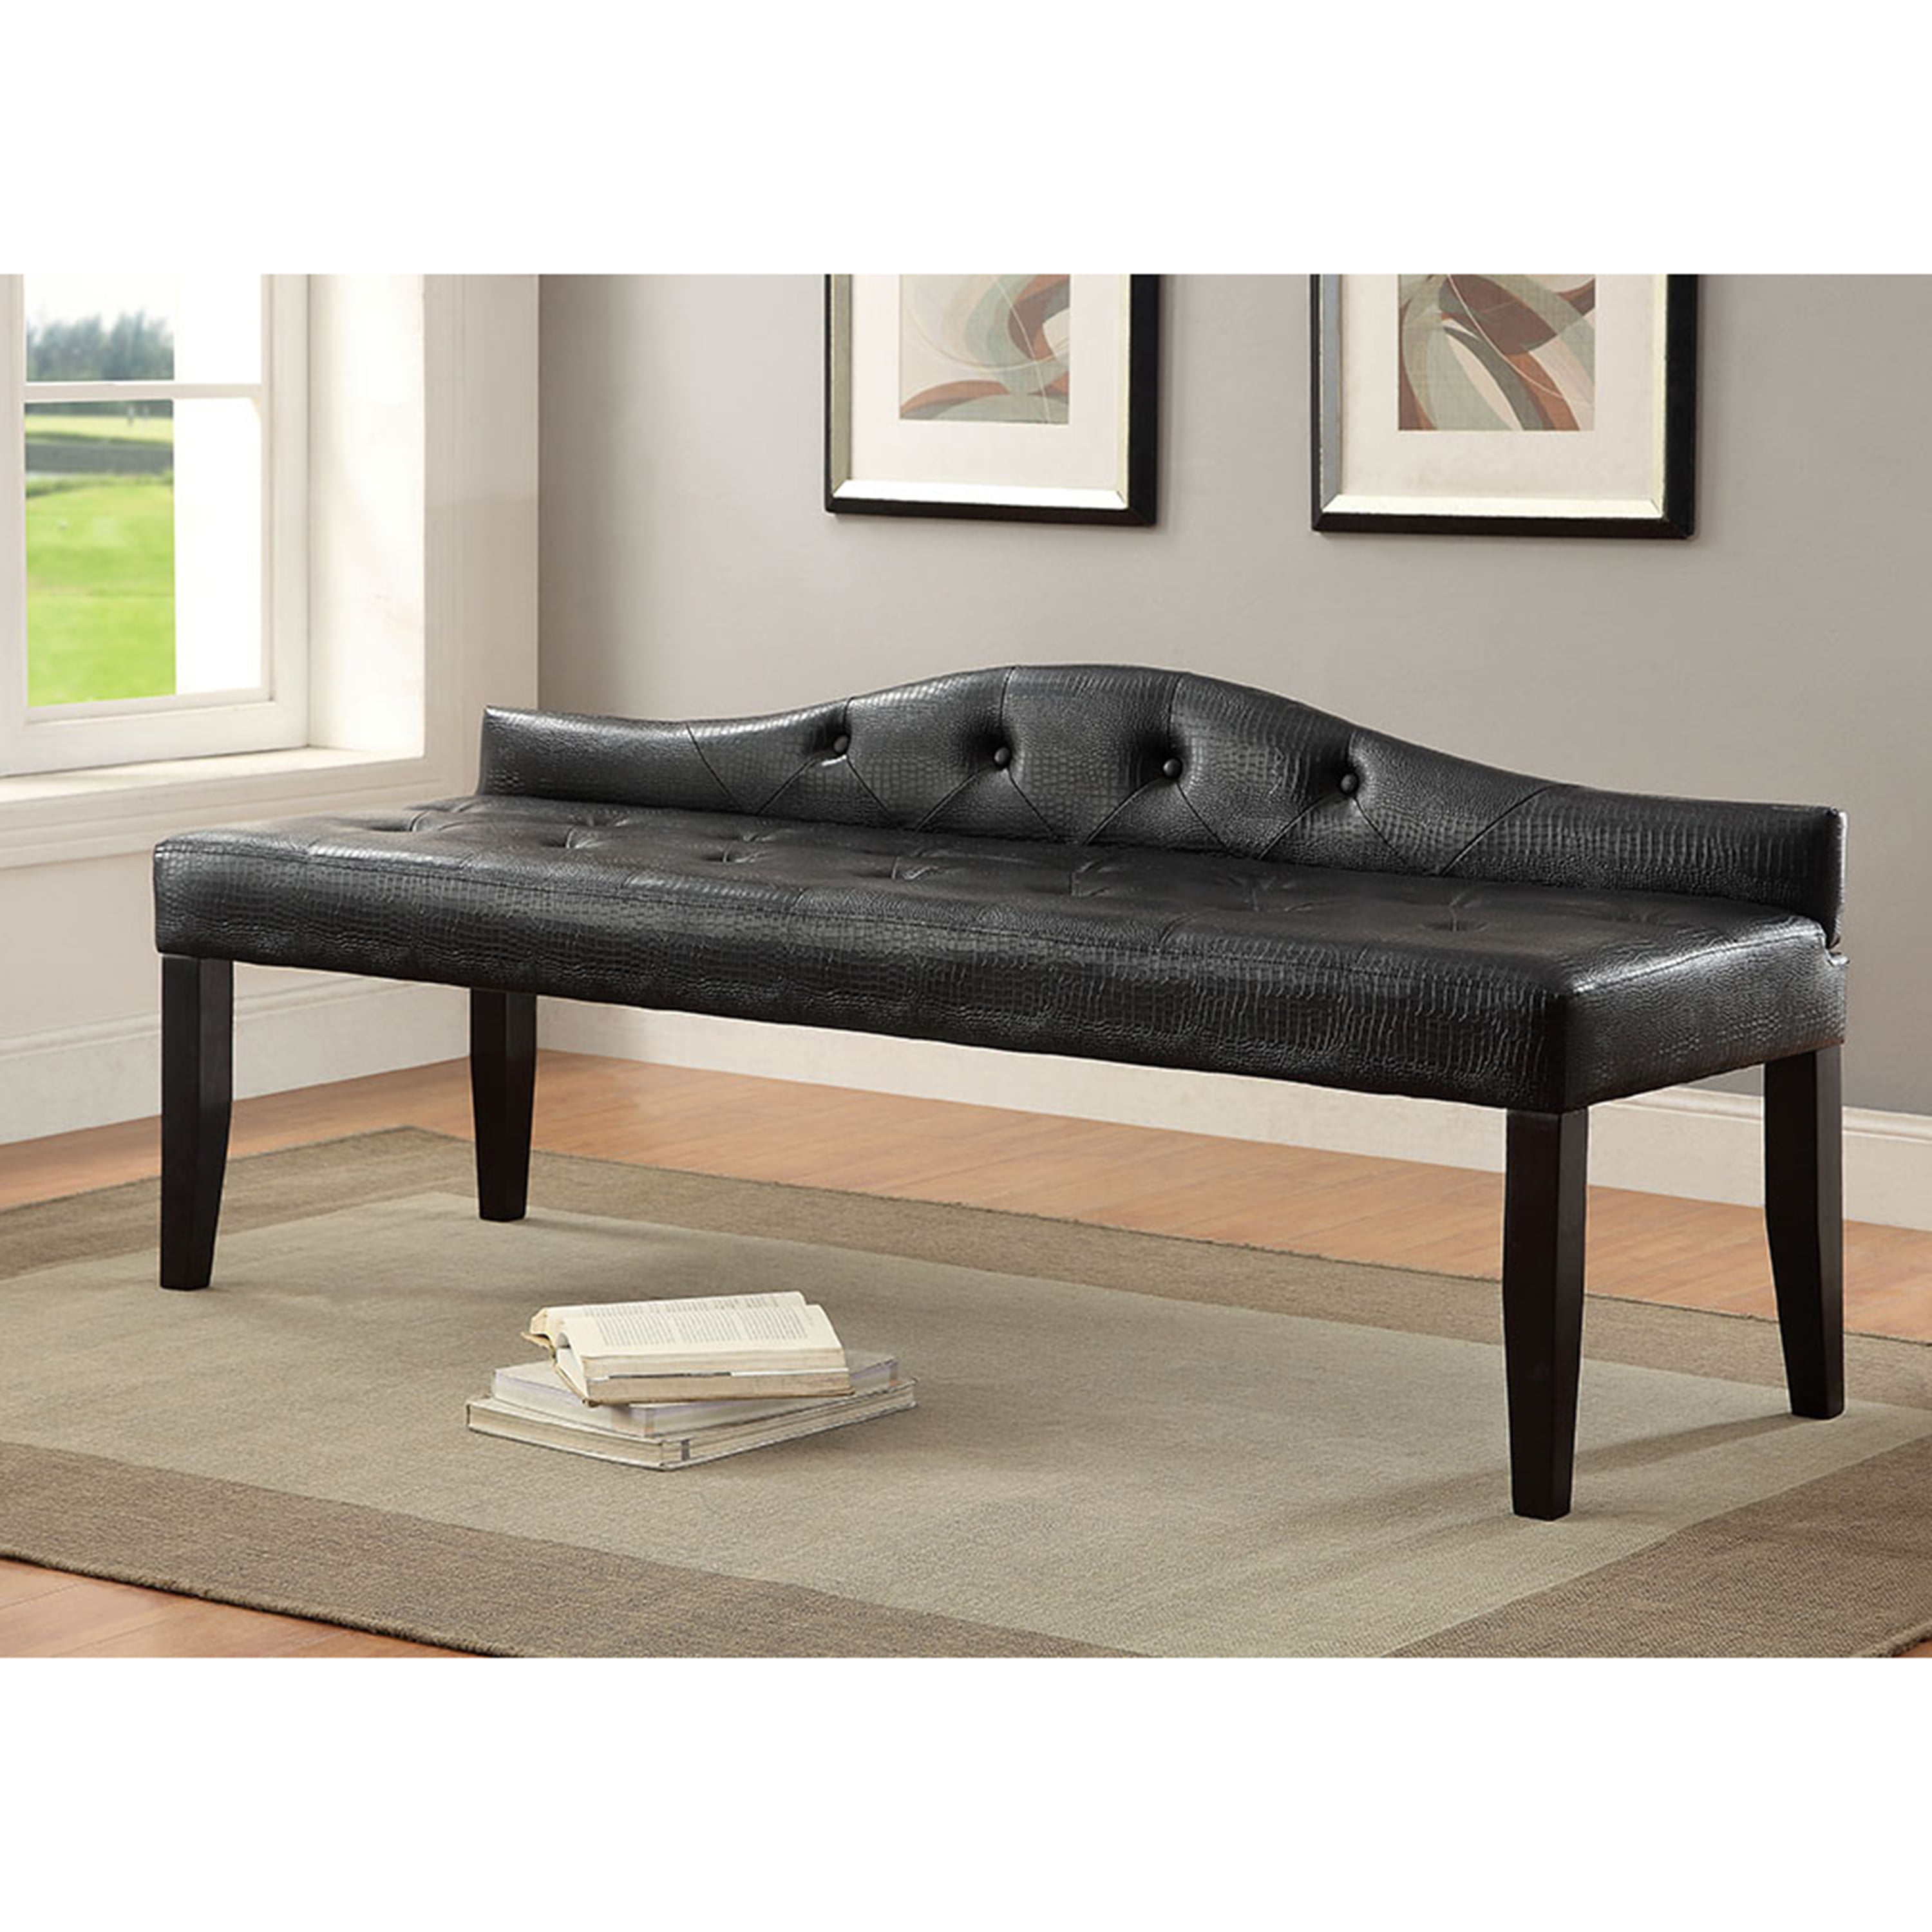 Leading Trends In Bedroom Upholstered Bench Designs